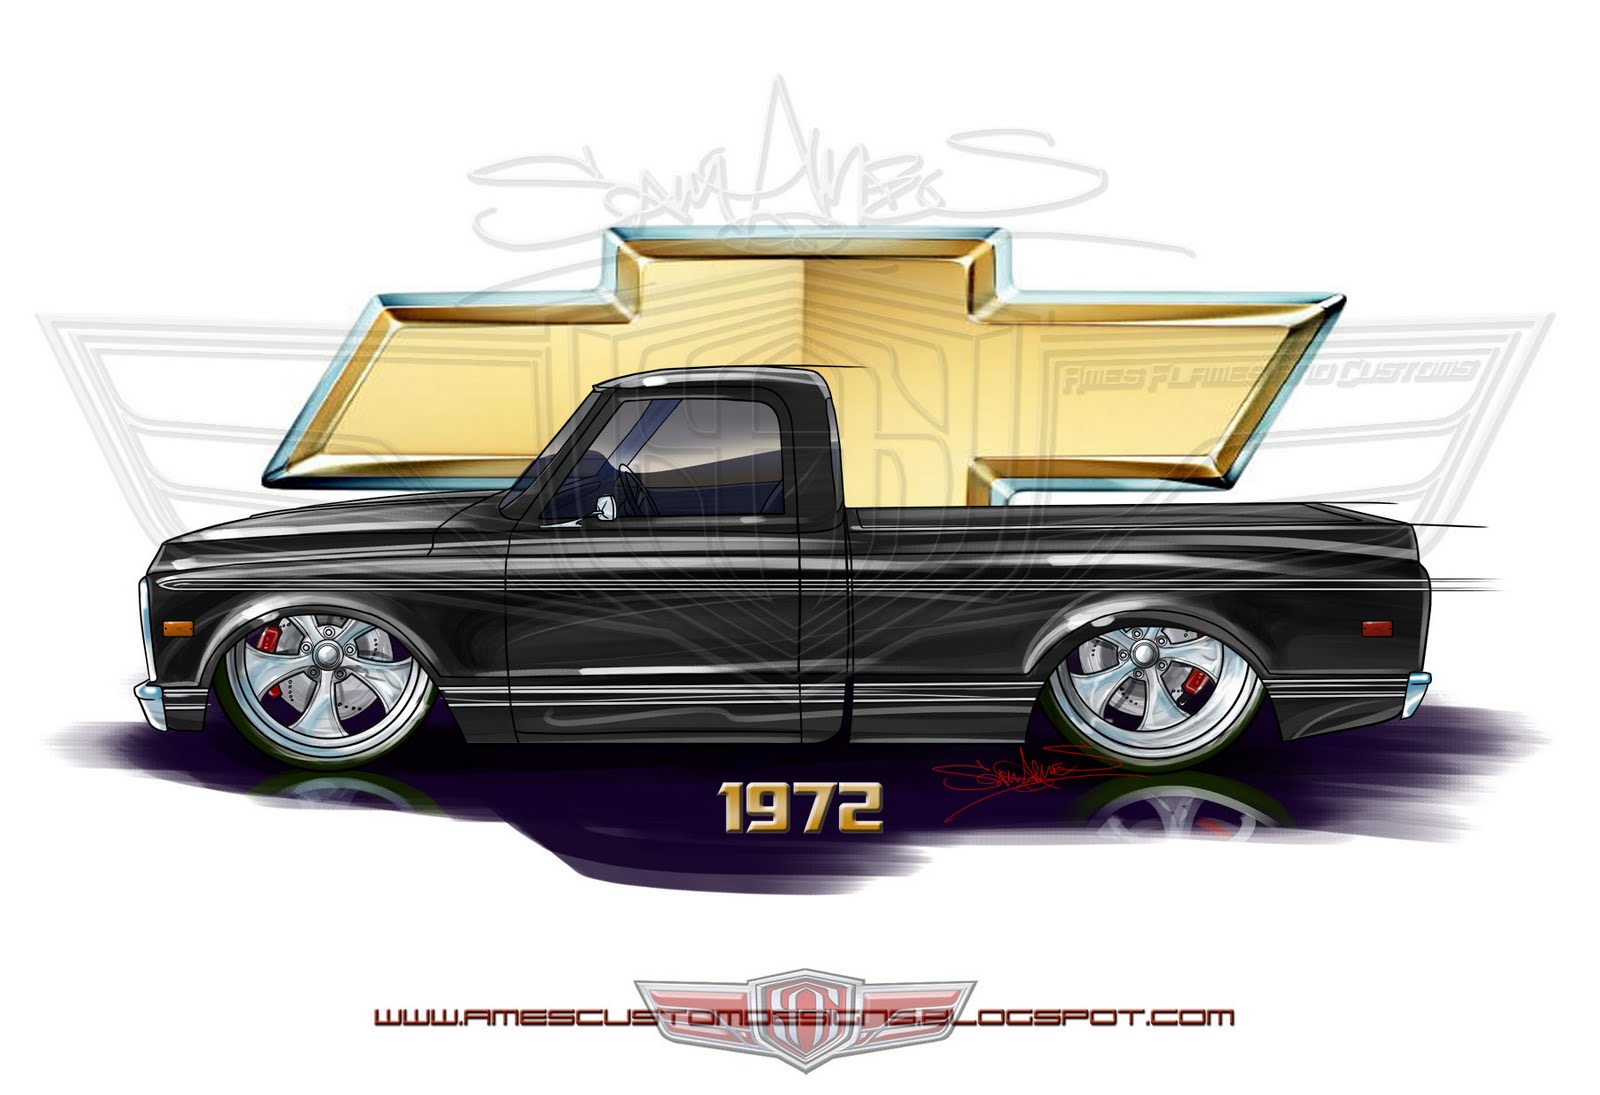 Chevy C10 Drawing at GetDrawings Free download